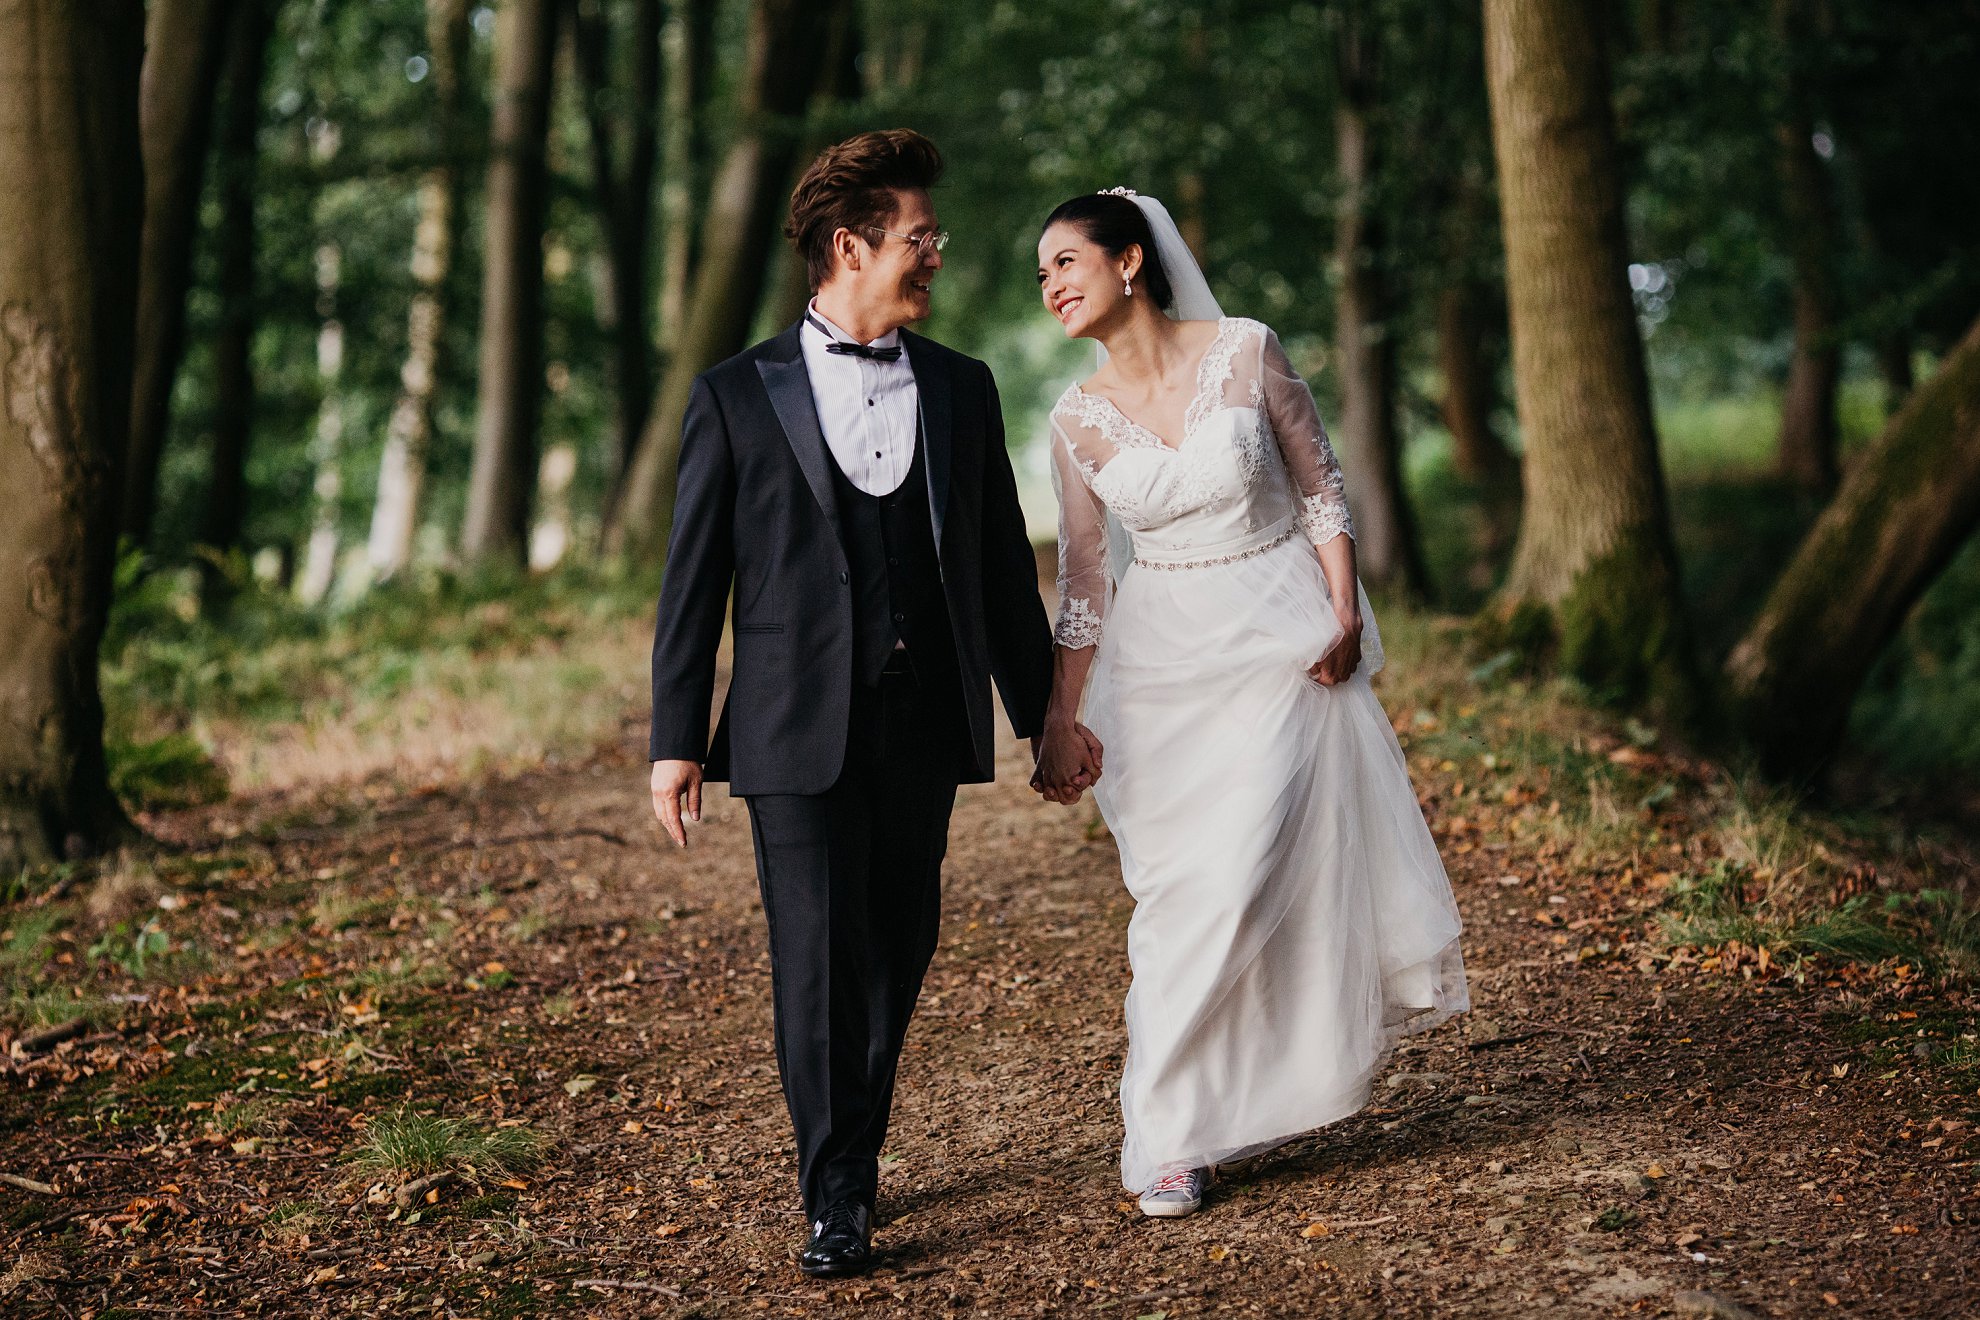 BEST WEDDING PHOTOGRAPHY OF 2018 by John Hope Photography